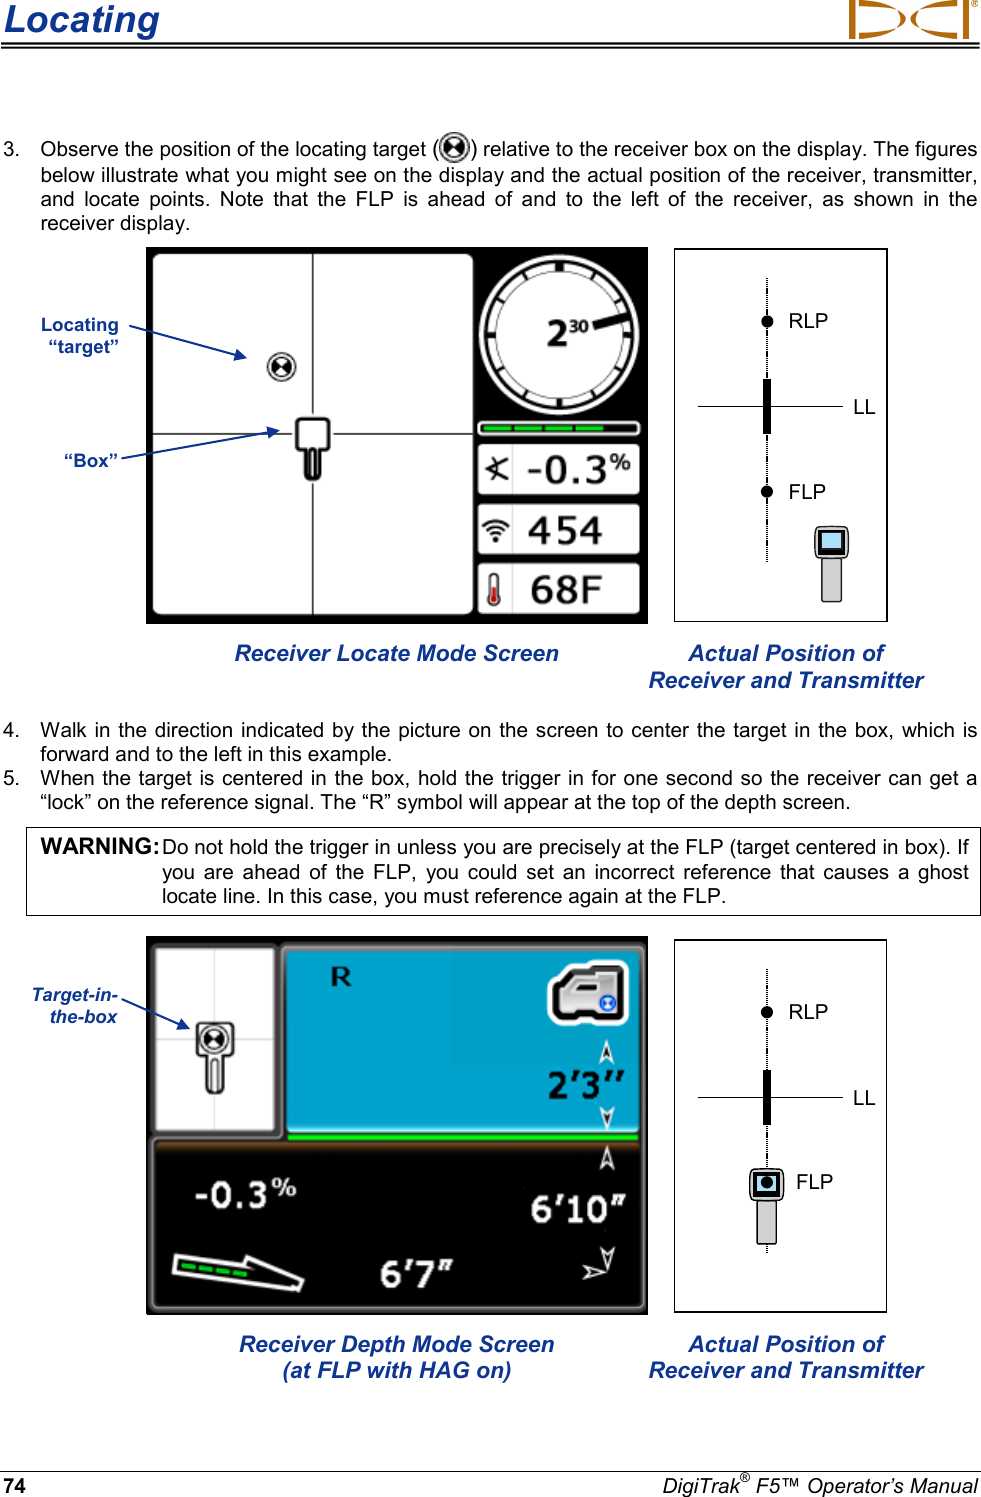 Locating     74 DigiTrak® F5™ Operator’s Manual 3. Observe the position of the locating target ( ) relative to the receiver box on the display. The figures below illustrate what you might see on the display and the actual position of the receiver, transmitter, and locate points. Note that the FLP is ahead of and to the left of the receiver, as shown in the receiver display.   RLPFLPLL Receiver Locate Mode Screen Actual Position of Receiver and Transmitter 4. Walk in the direction indicated by the picture on the screen to center the target in the box,  which is forward and to the left in this example. 5. When the target is centered in the box, hold the trigger in for one second so the receiver can get a “lock” on the reference signal. The “R” symbol will appear at the top of the depth screen.  WARNING: Do not hold the trigger in unless you are precisely at the FLP (target centered in box). If you are ahead of the FLP, you could set an incorrect reference that causes a ghost locate line. In this case, you must reference again at the FLP.    RLPFLPLL Receiver Depth Mode Screen  (at FLP with HAG on) Actual Position of Receiver and Transmitter Locating “target” “Box” Target-in-the-box  